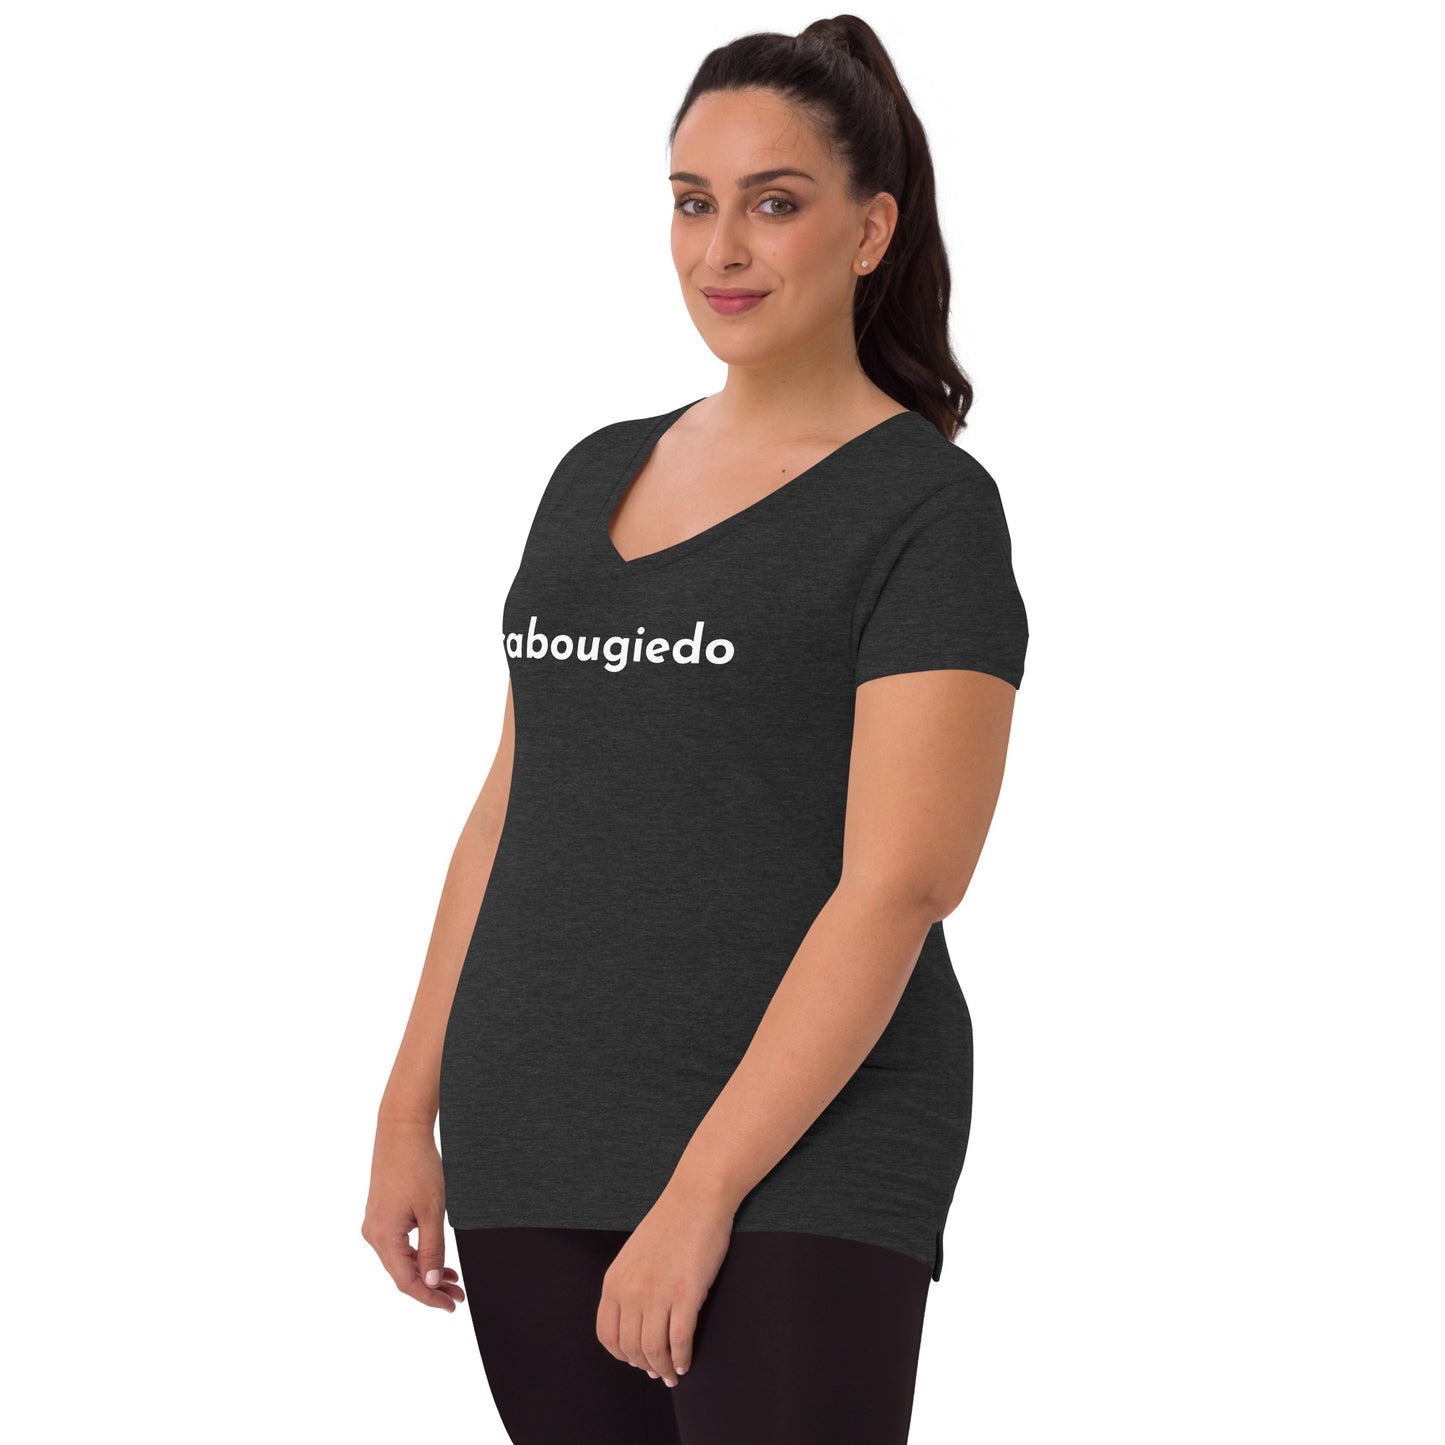 Women’s recycled v-neck t-shirt - CaBougieDo